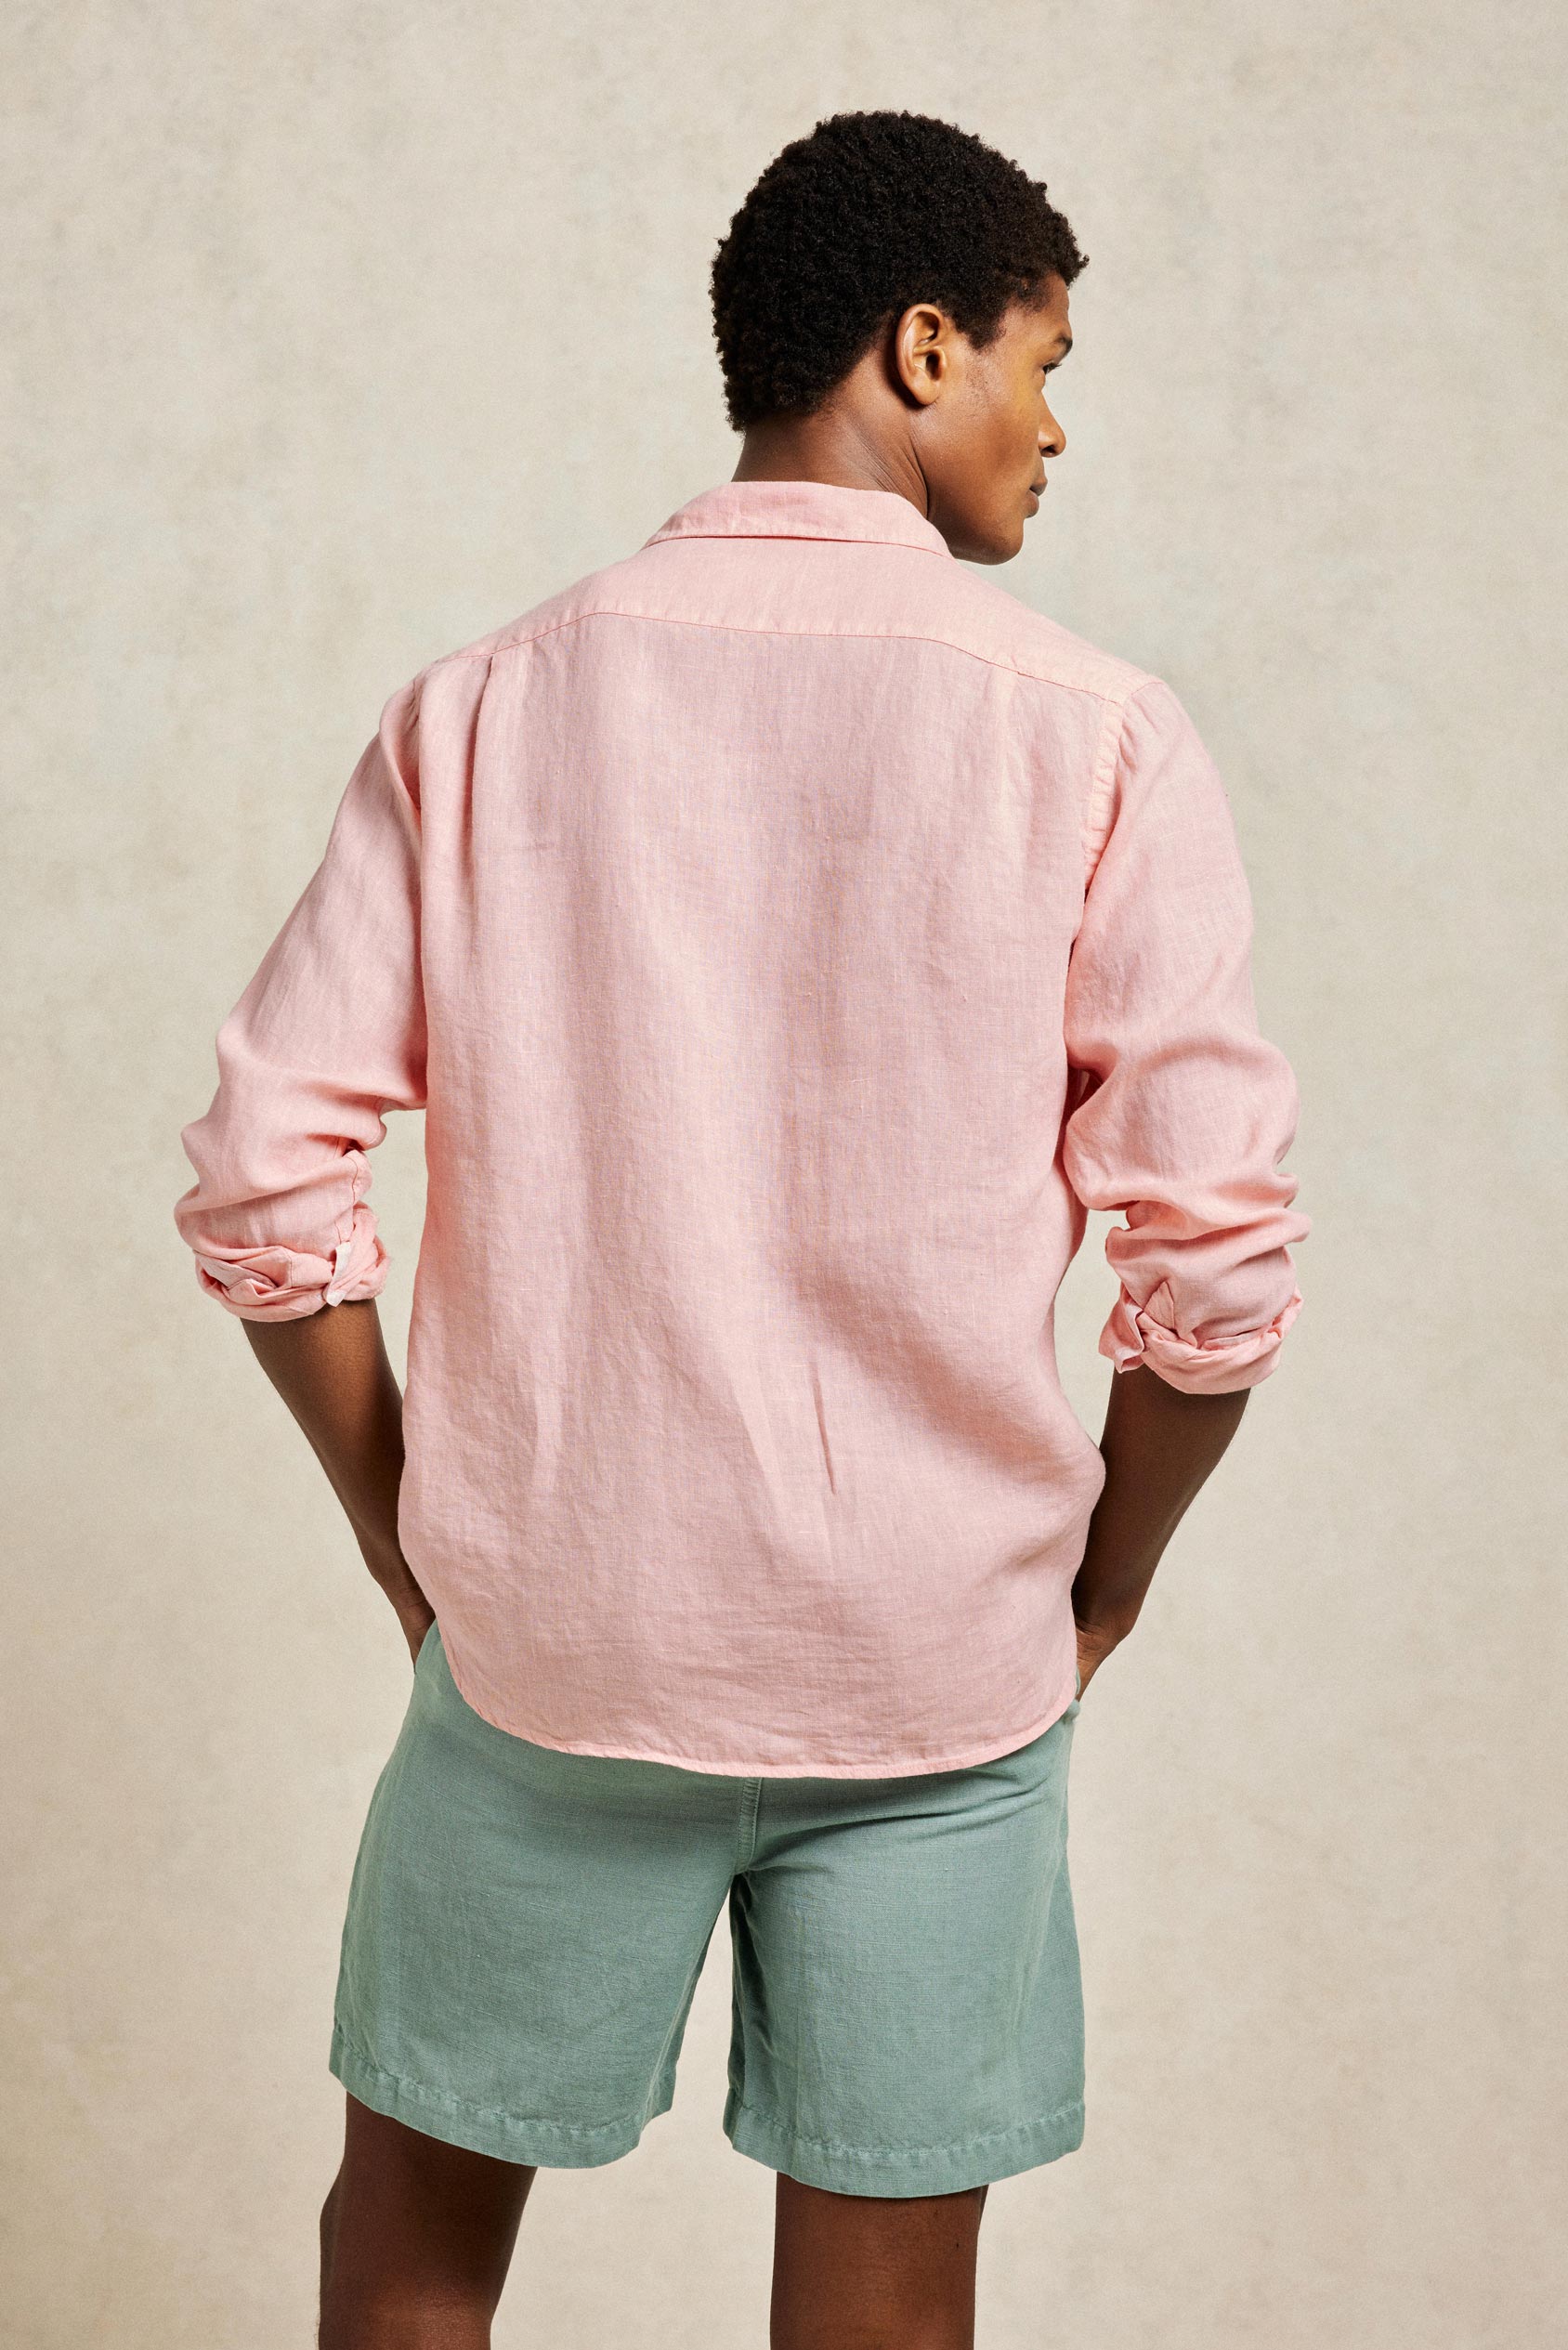 Linen garment dyed washed men’s pink shirt with classic collar. 100% Linen. Cut from soft linen to an immaculate fit with a classic collar. Casual wear. Made in Portugal. Machine wash. Size S, M, L, XL, XXL.